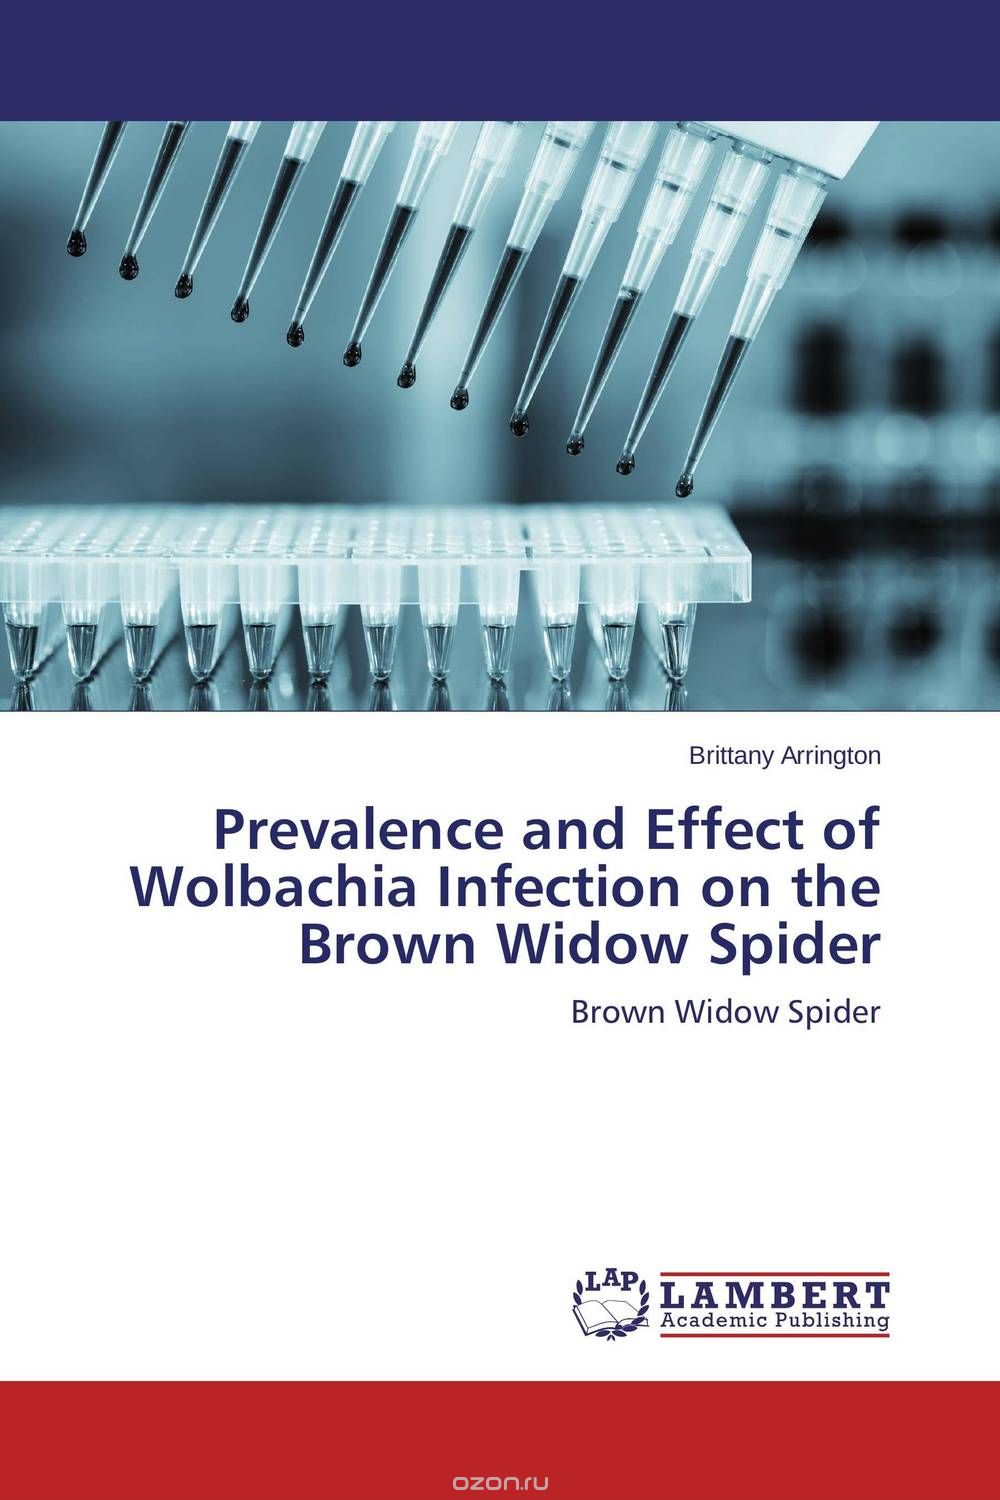 Скачать книгу "Prevalence and Effect of Wolbachia Infection on the Brown Widow Spider"